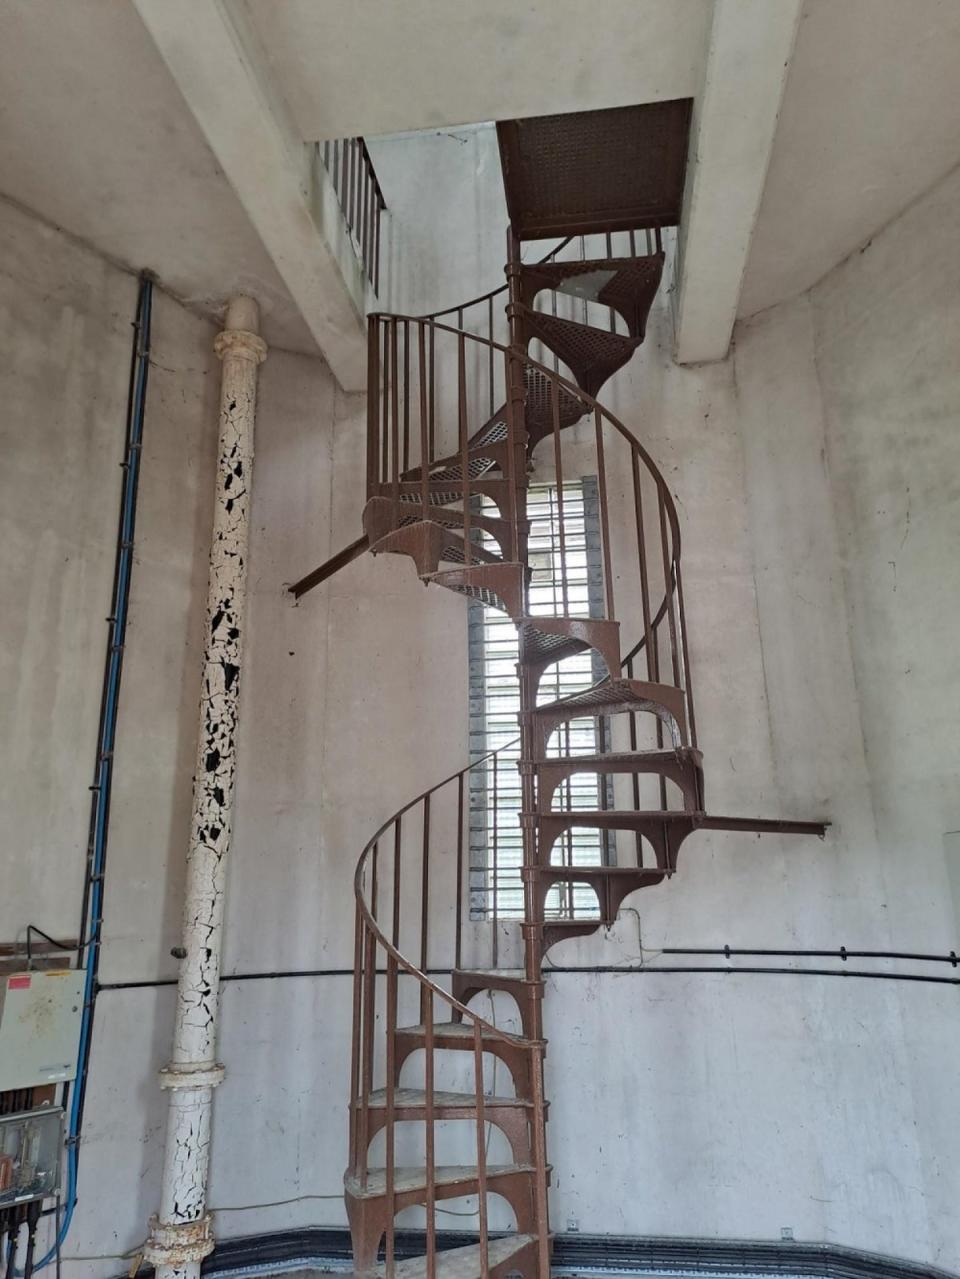 The tower still has its wrought iron spiral staircase (Auction House London)